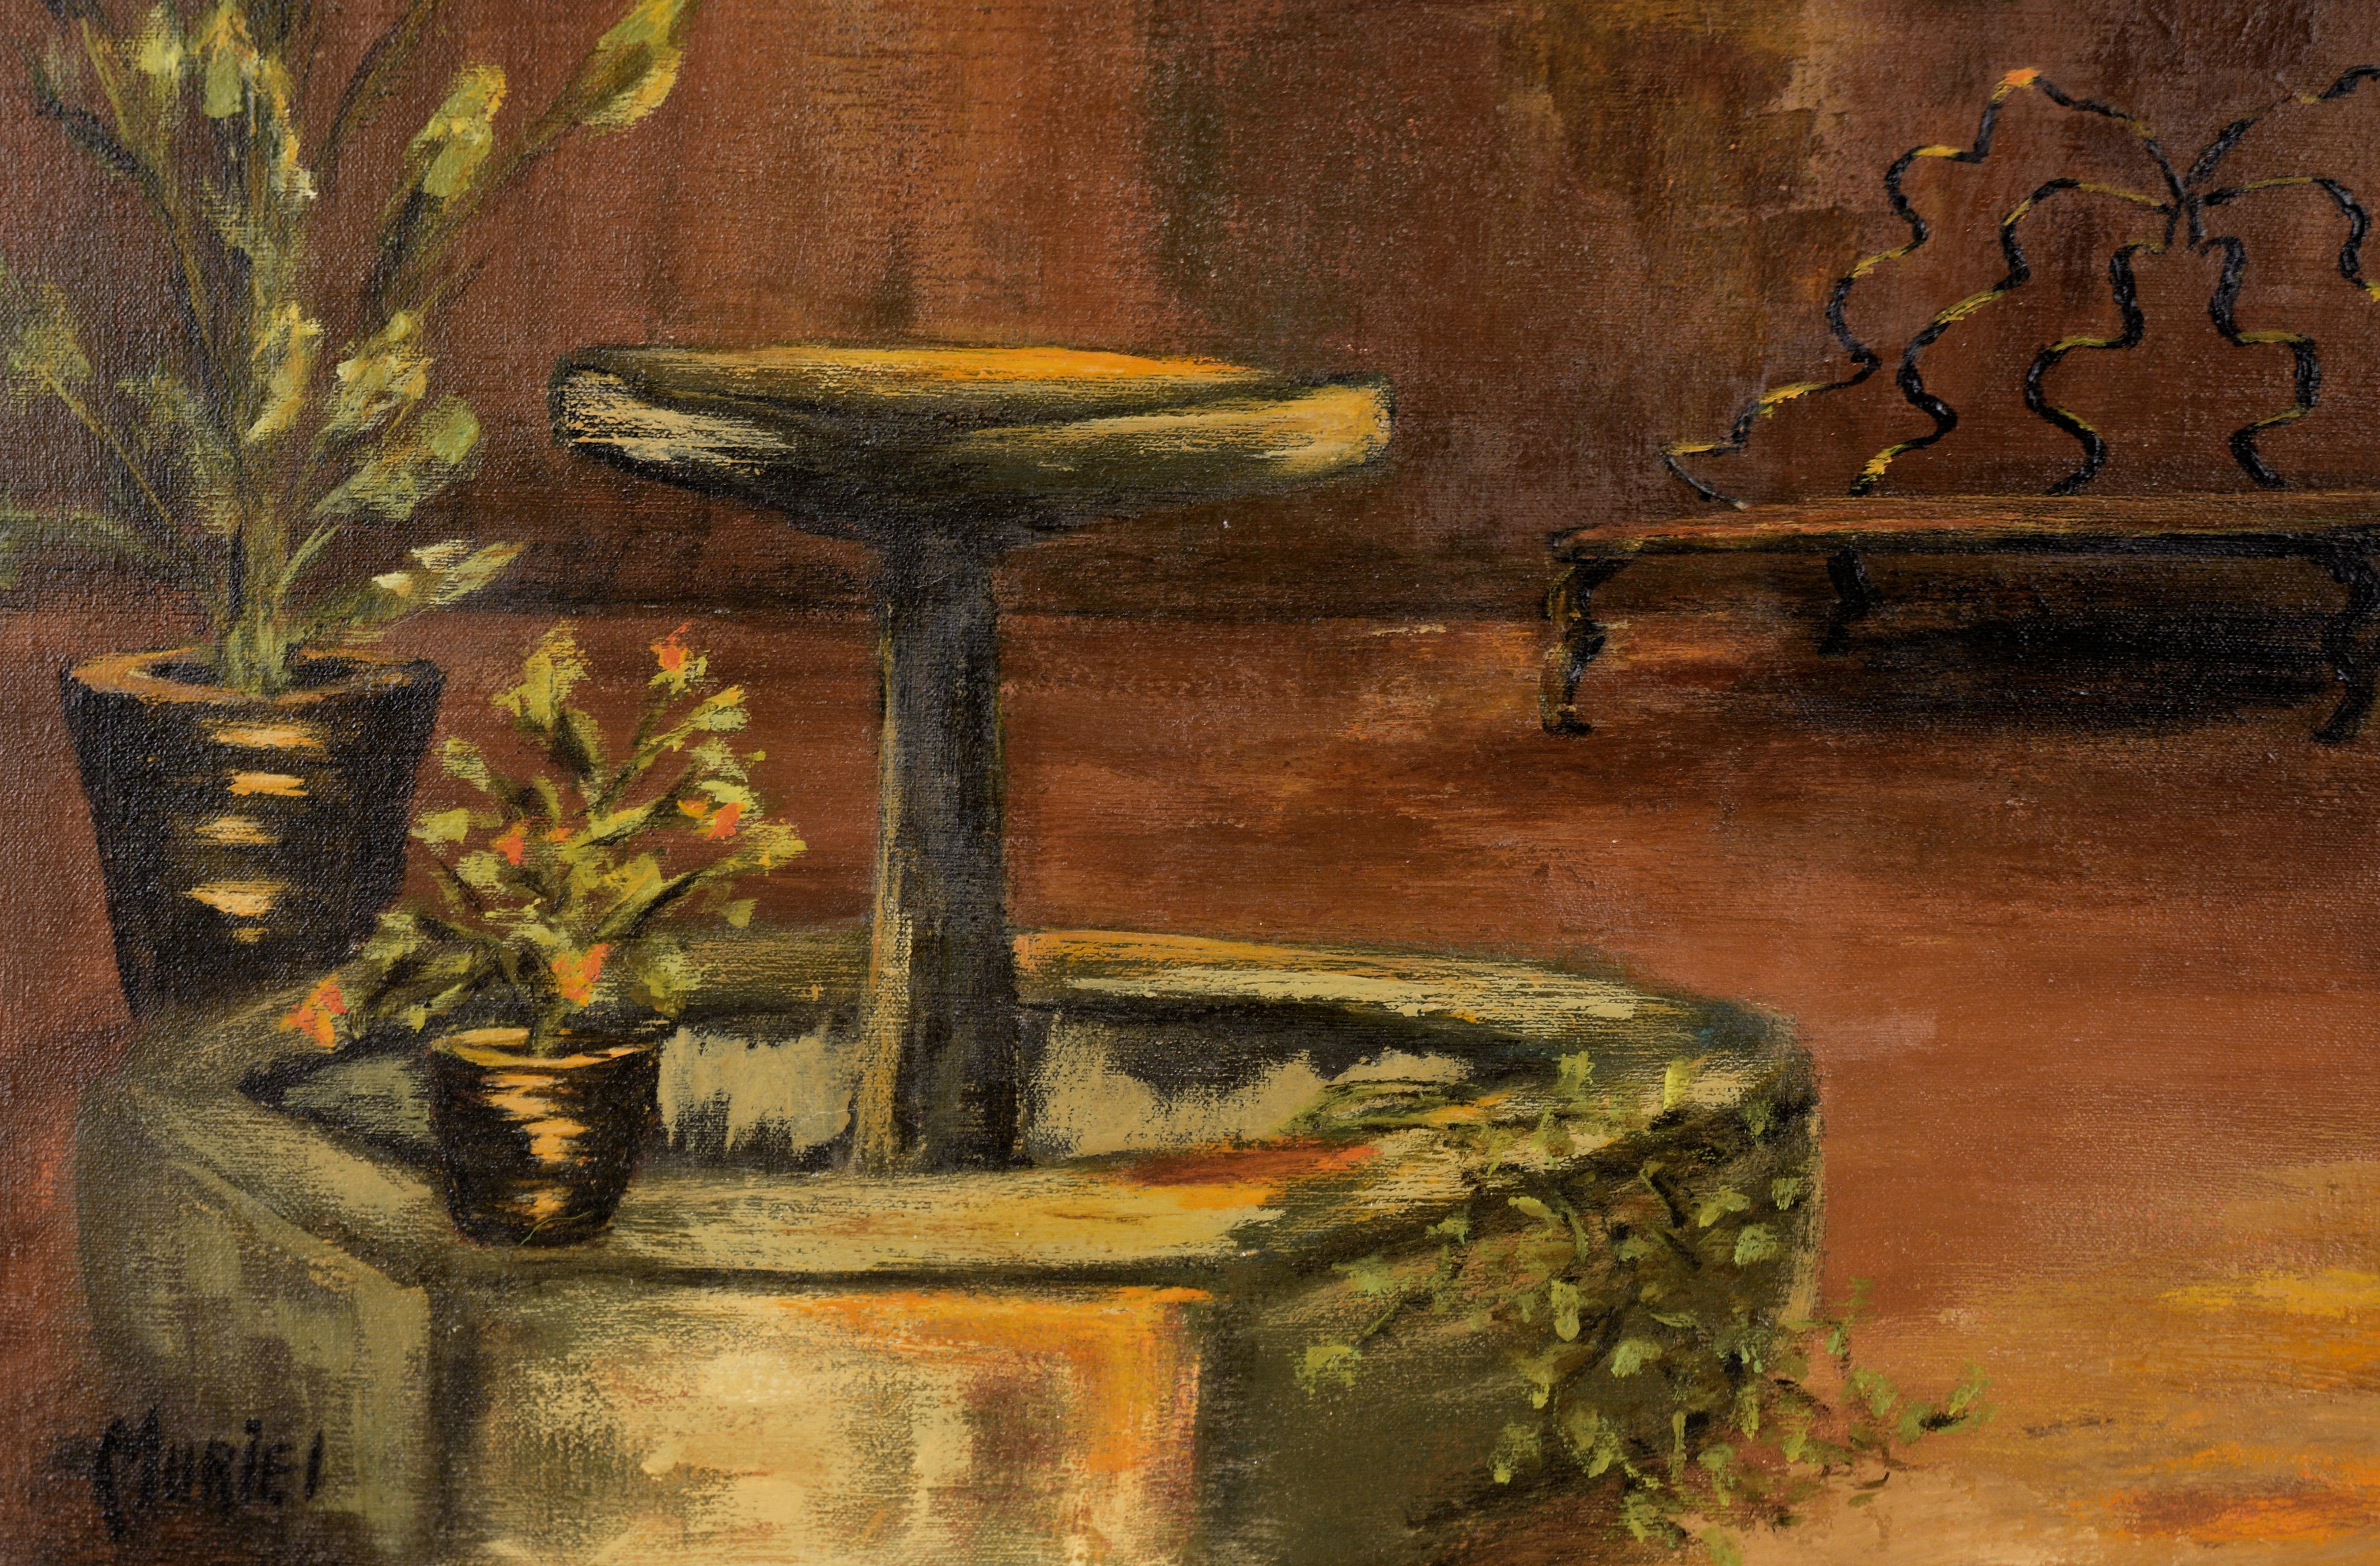 Courtyard with Fountain - Interior Landscape in Oil on Canvas - American Impressionist Painting by Muriel Kittock